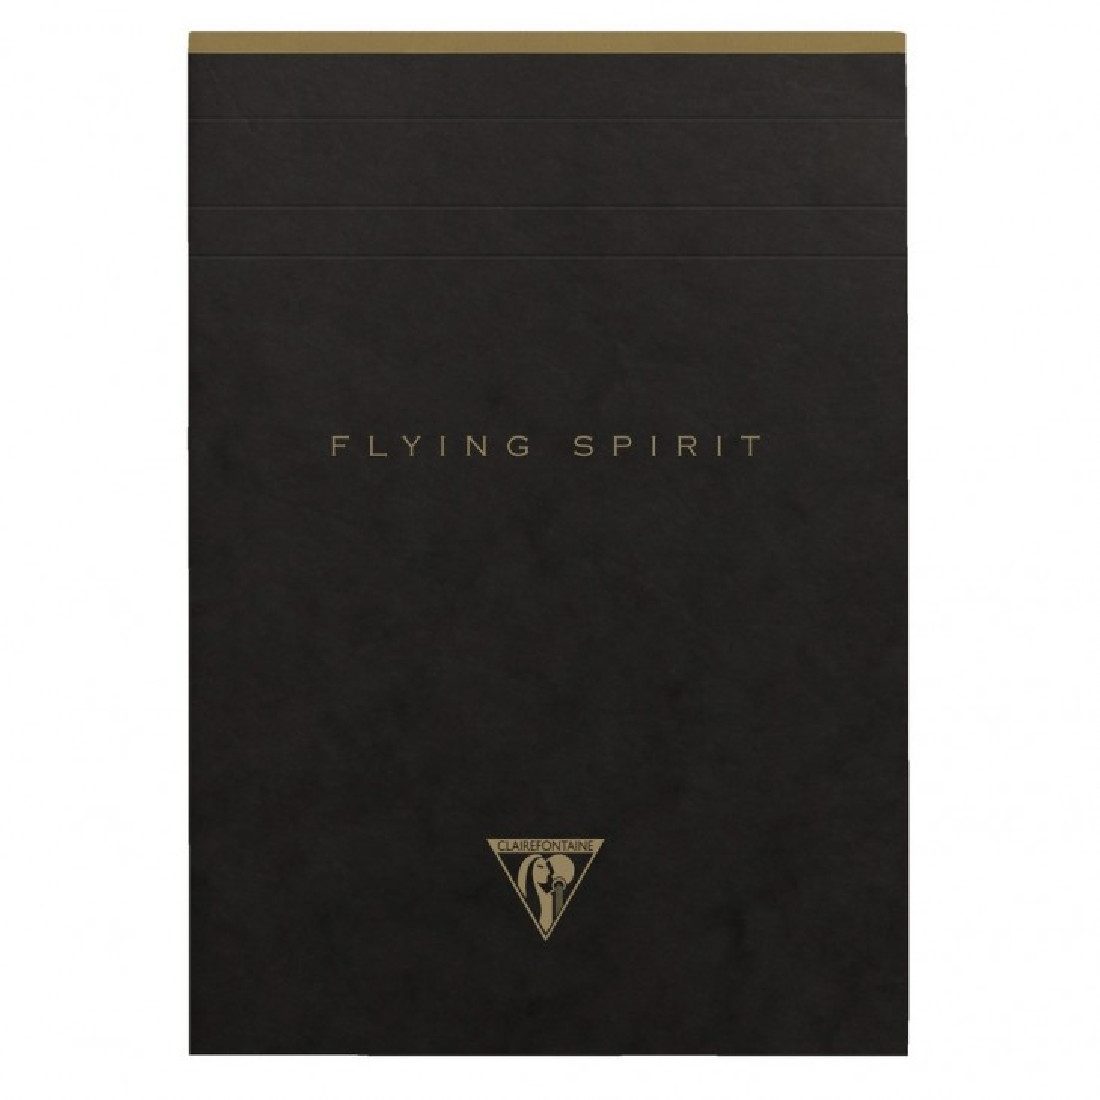 Clairefontaine Rhodia notepad A5 21x14,8cm, Flying spirit, 140 pages, Lined, ivoire paper 90gr, black craft cover,102636